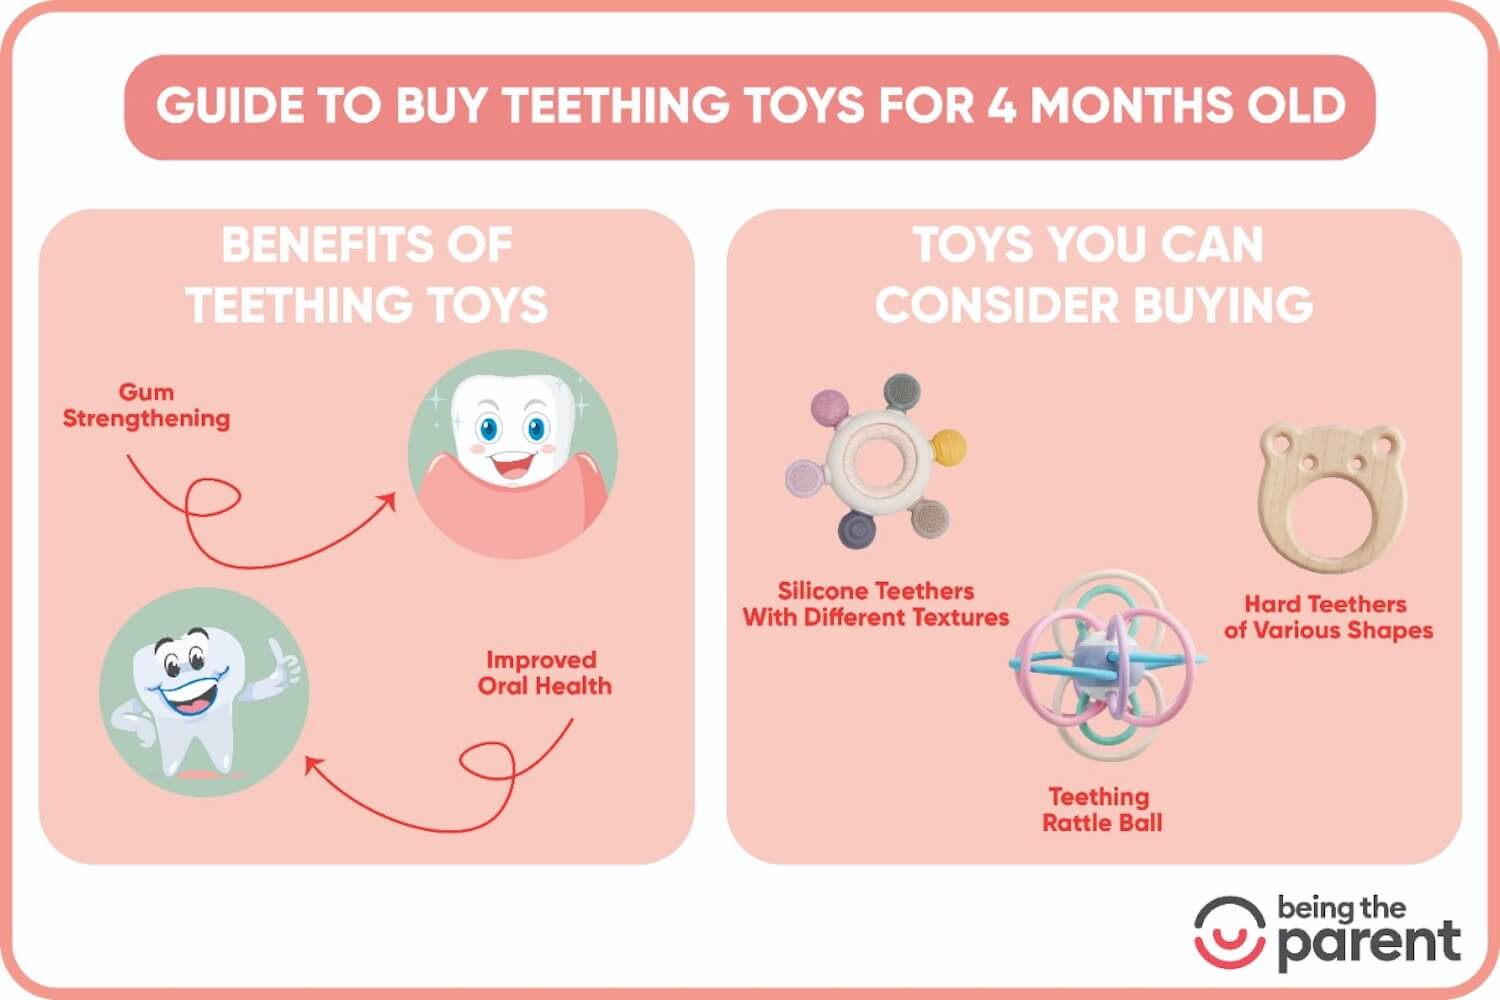 Teething toys for 4 month old